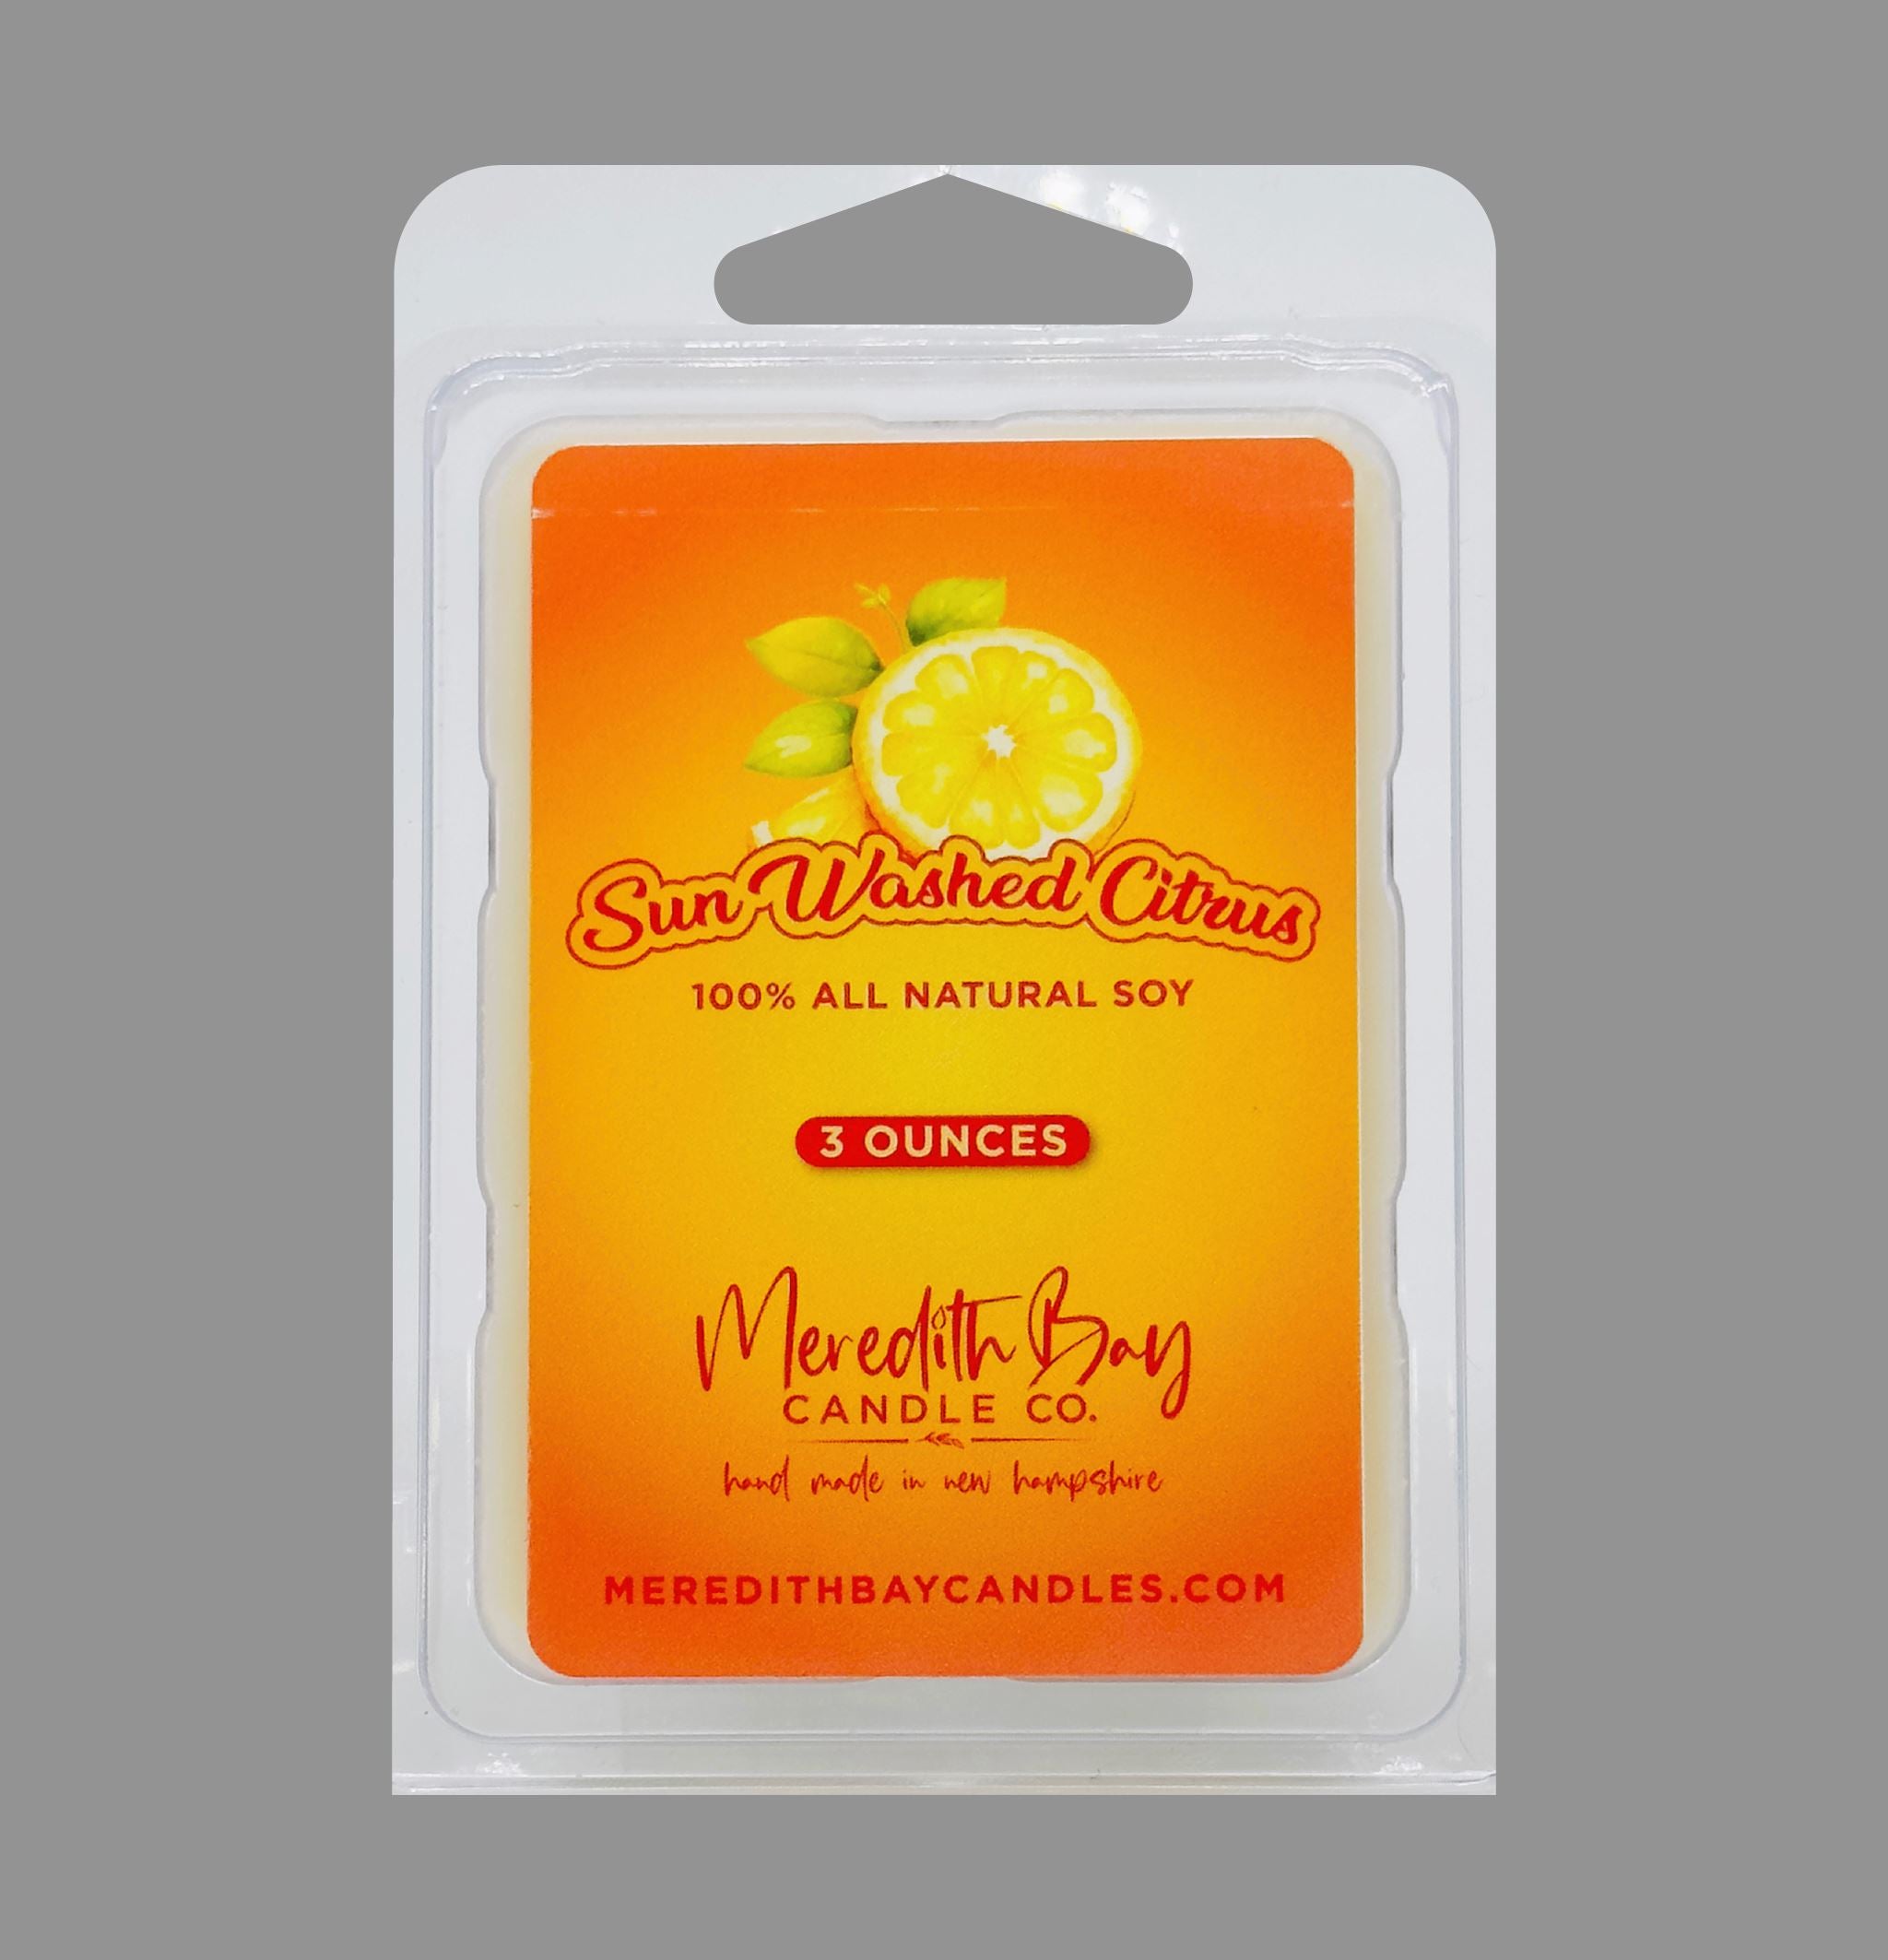 Sun Washed Citrus Wax Melt Meredith Bay Candle Co 